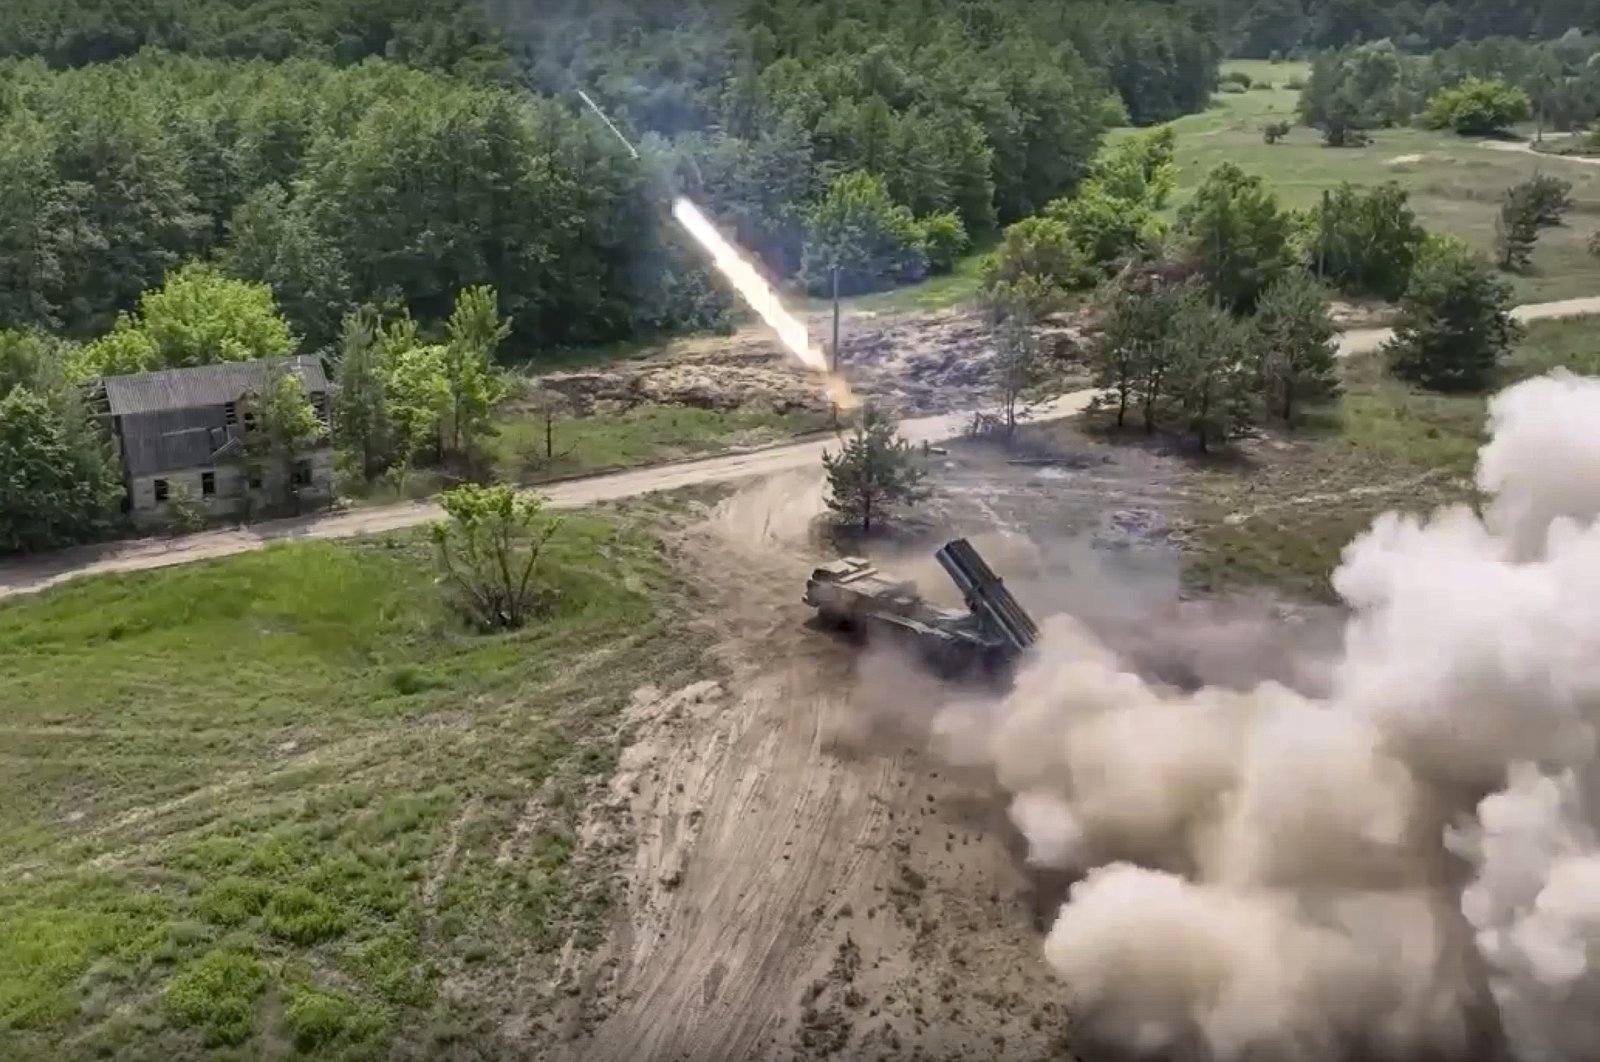 A Russian military&#039;s multiple rocket launcher fires rockets at Ukrainian troops at an undisclosed location, June 25, 2022. (Russian Defense Ministry Press Service via AP)